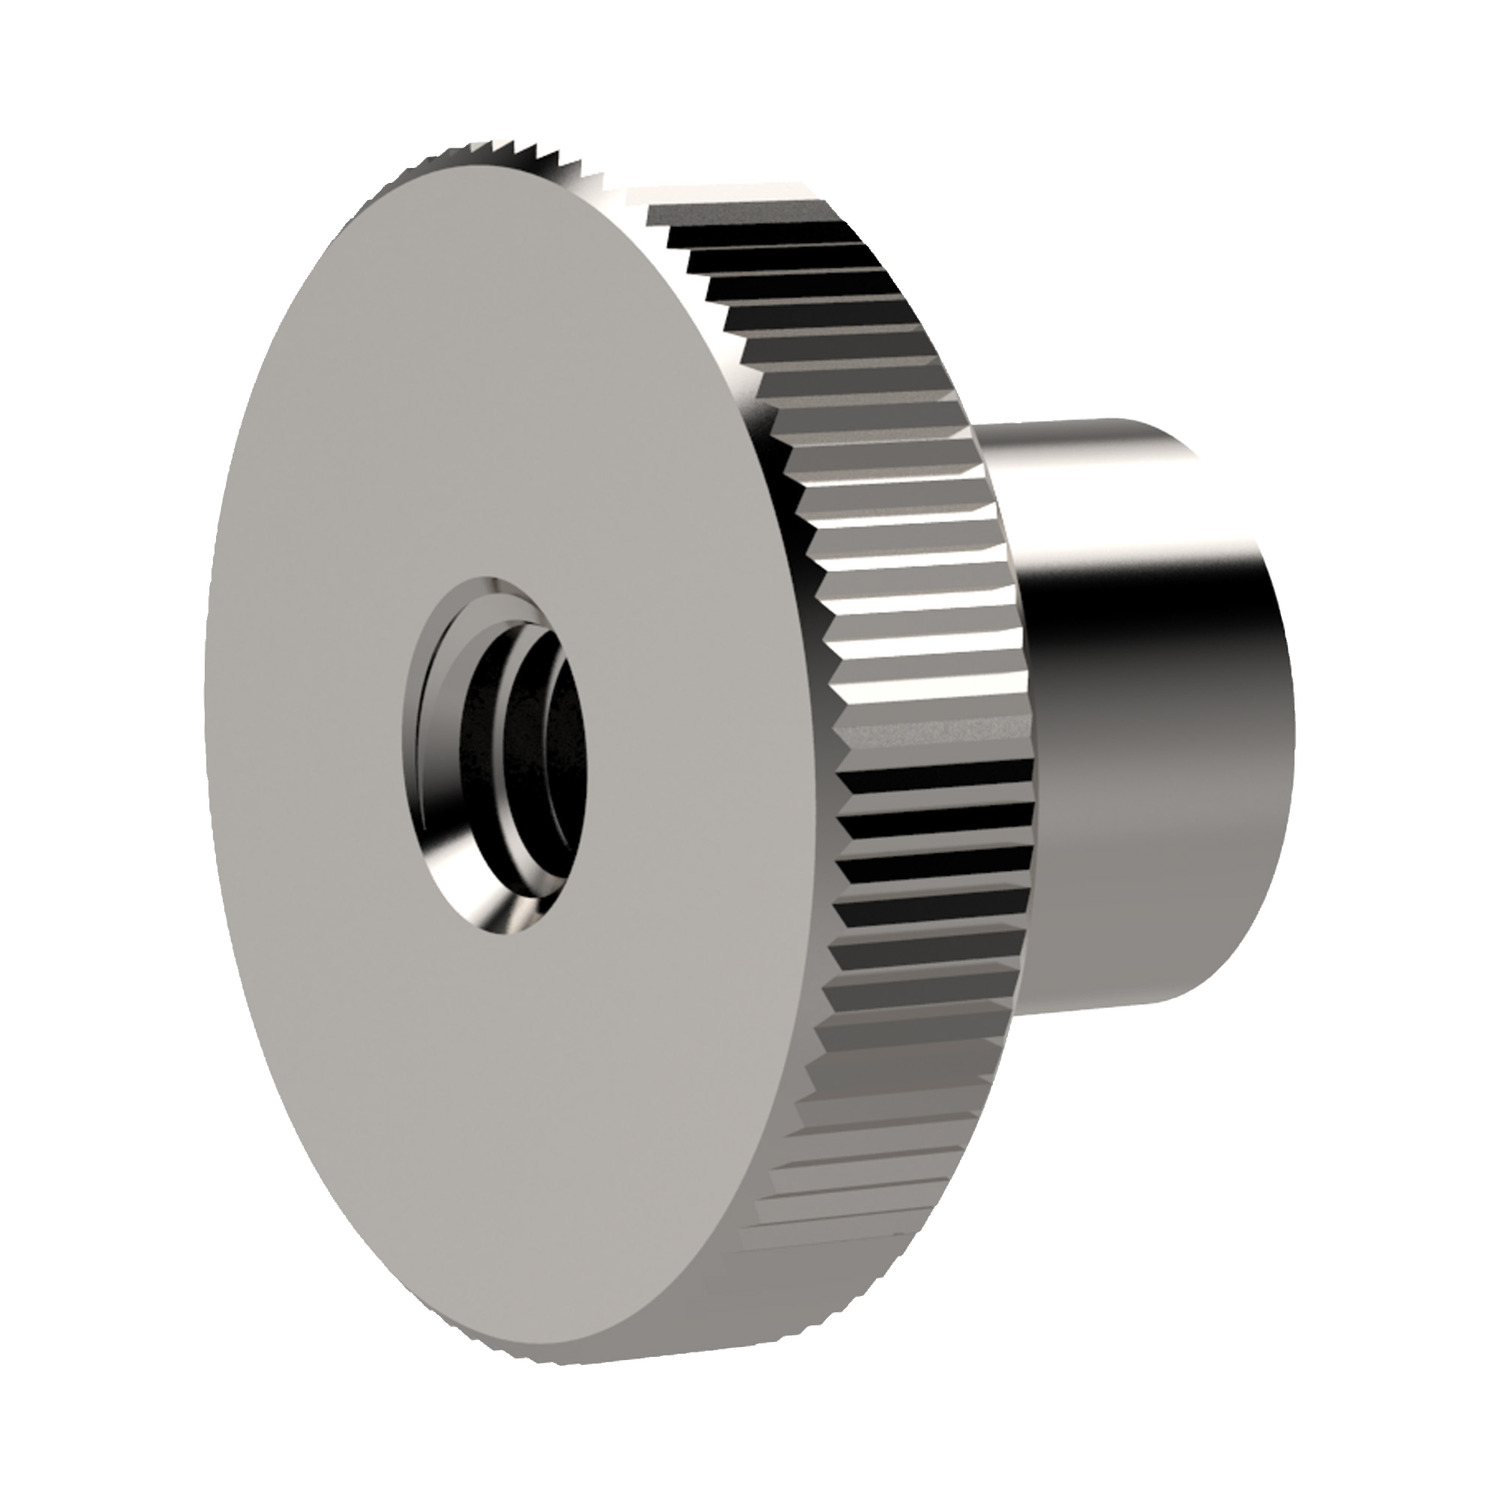 37110.W0003 Knurled Nuts with collar,Stainless Steel Please note, sold in multiples of 5